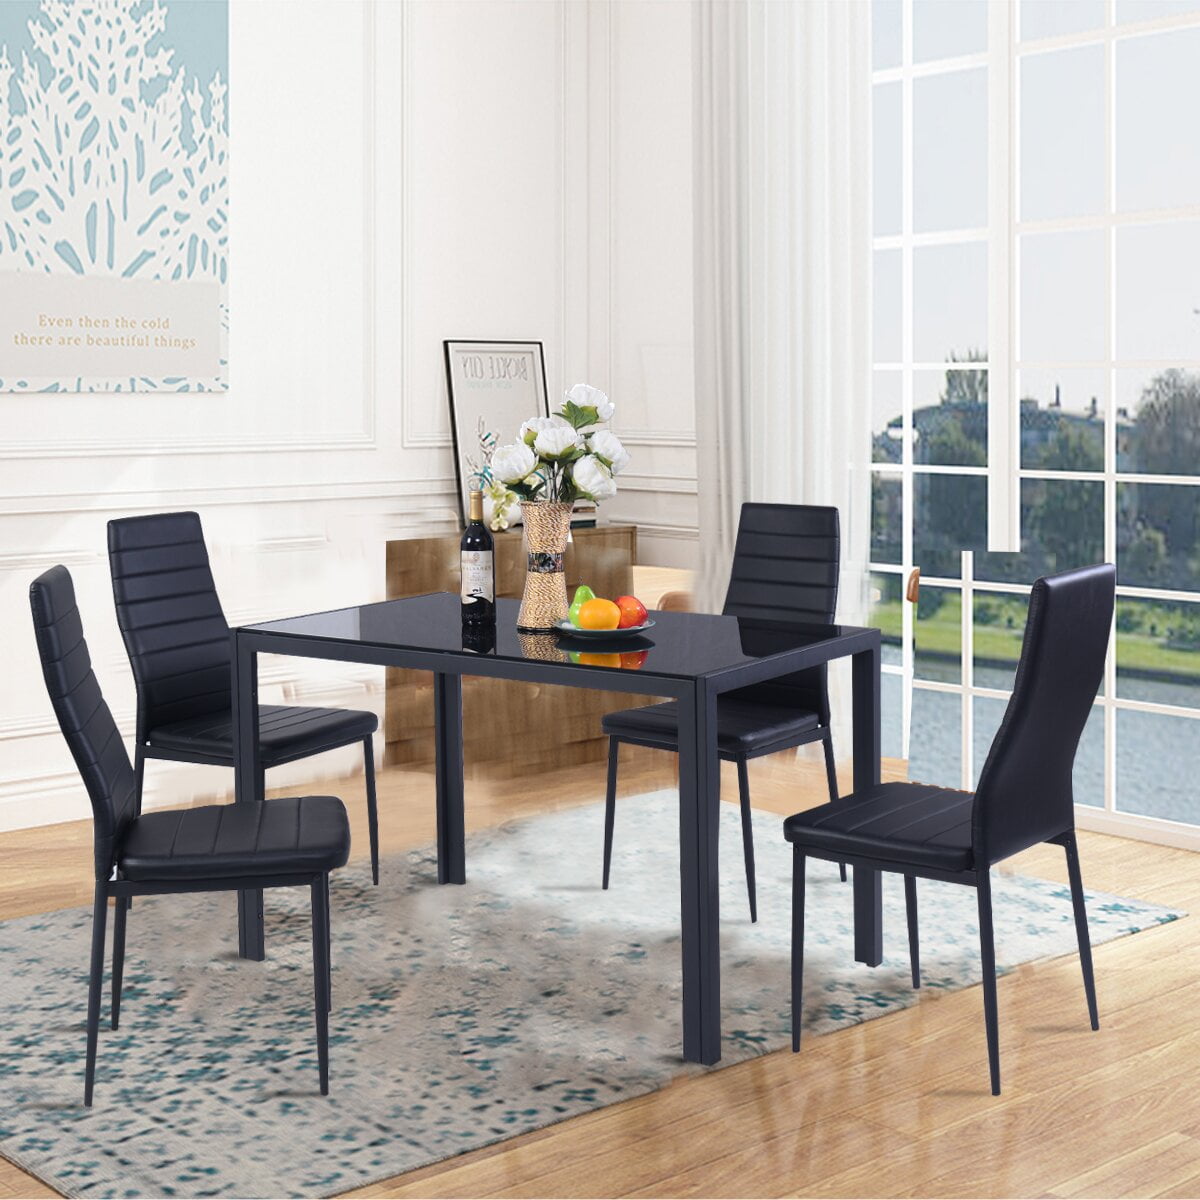 Gymax 5 Piece Table Chair Kitchen Dining Set Furniture Glass Metal ...